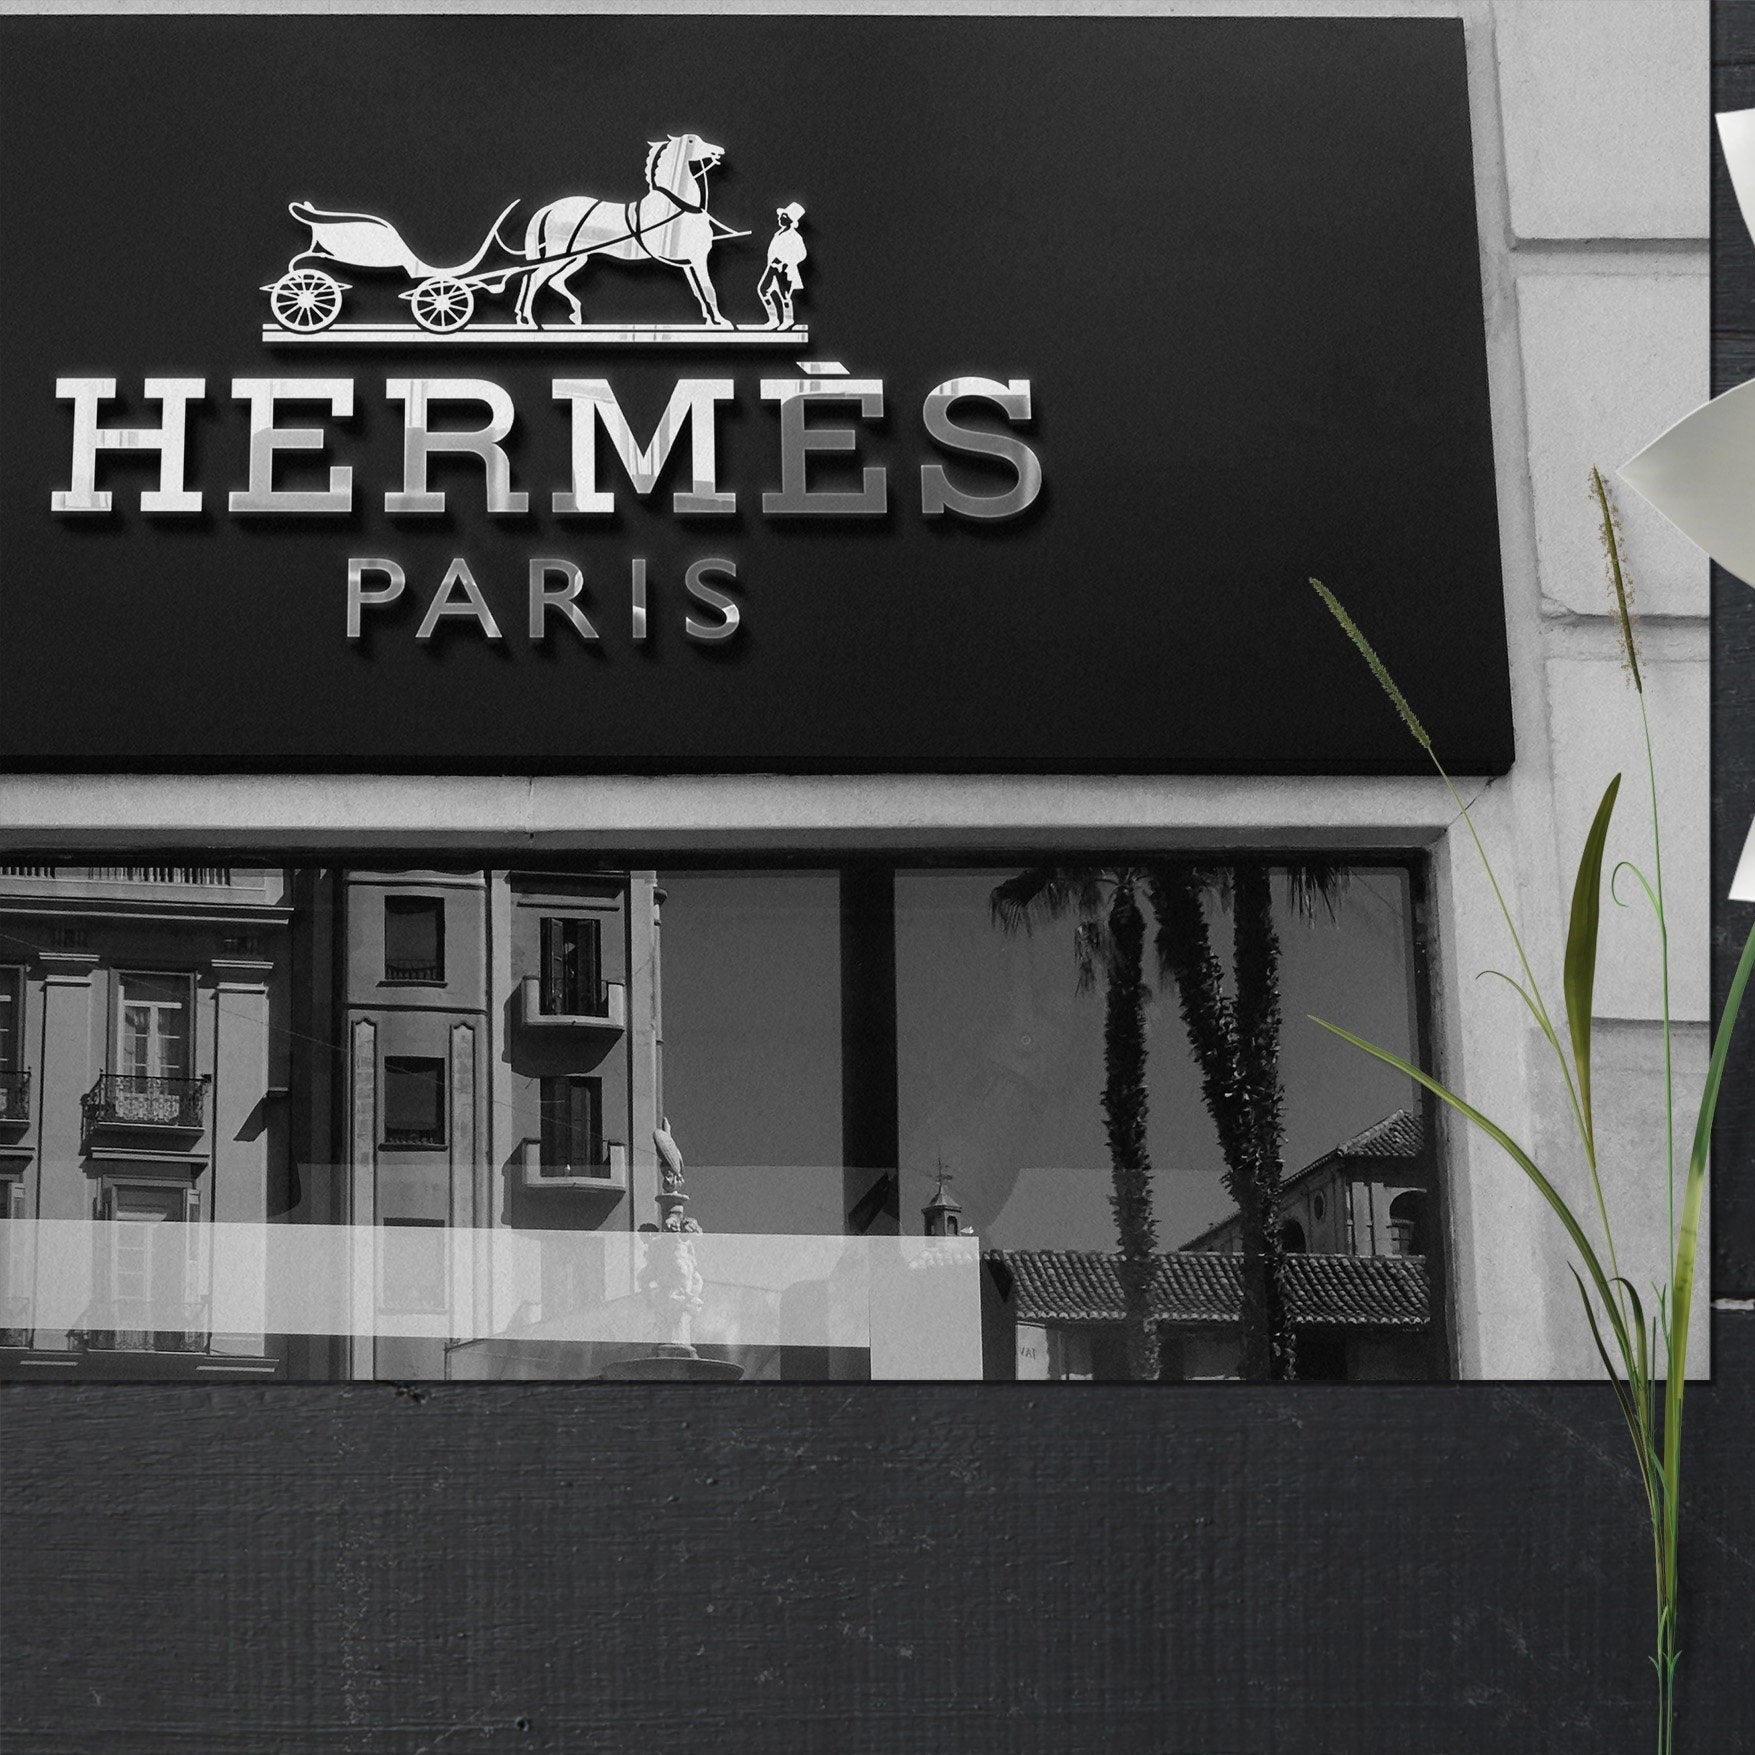 Hermes Shop Photo St Tropez Wall Poster South of France 